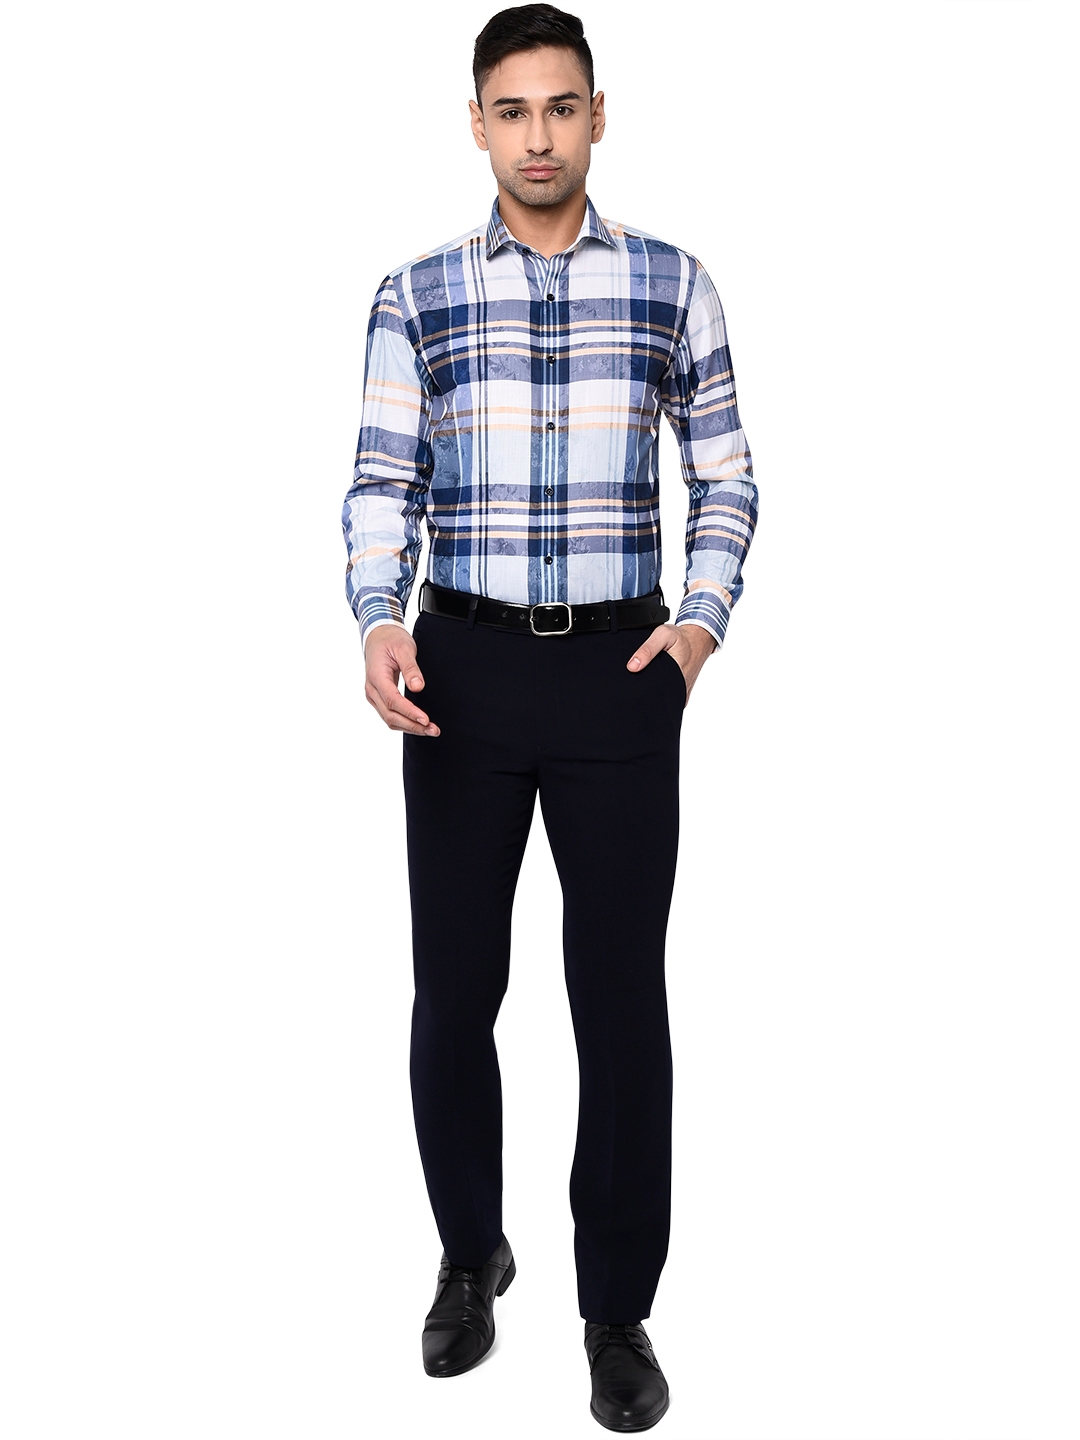 Greenfibre | White & Blue Checked Slim Fit Party Wear Shirt | Greenfibre 3